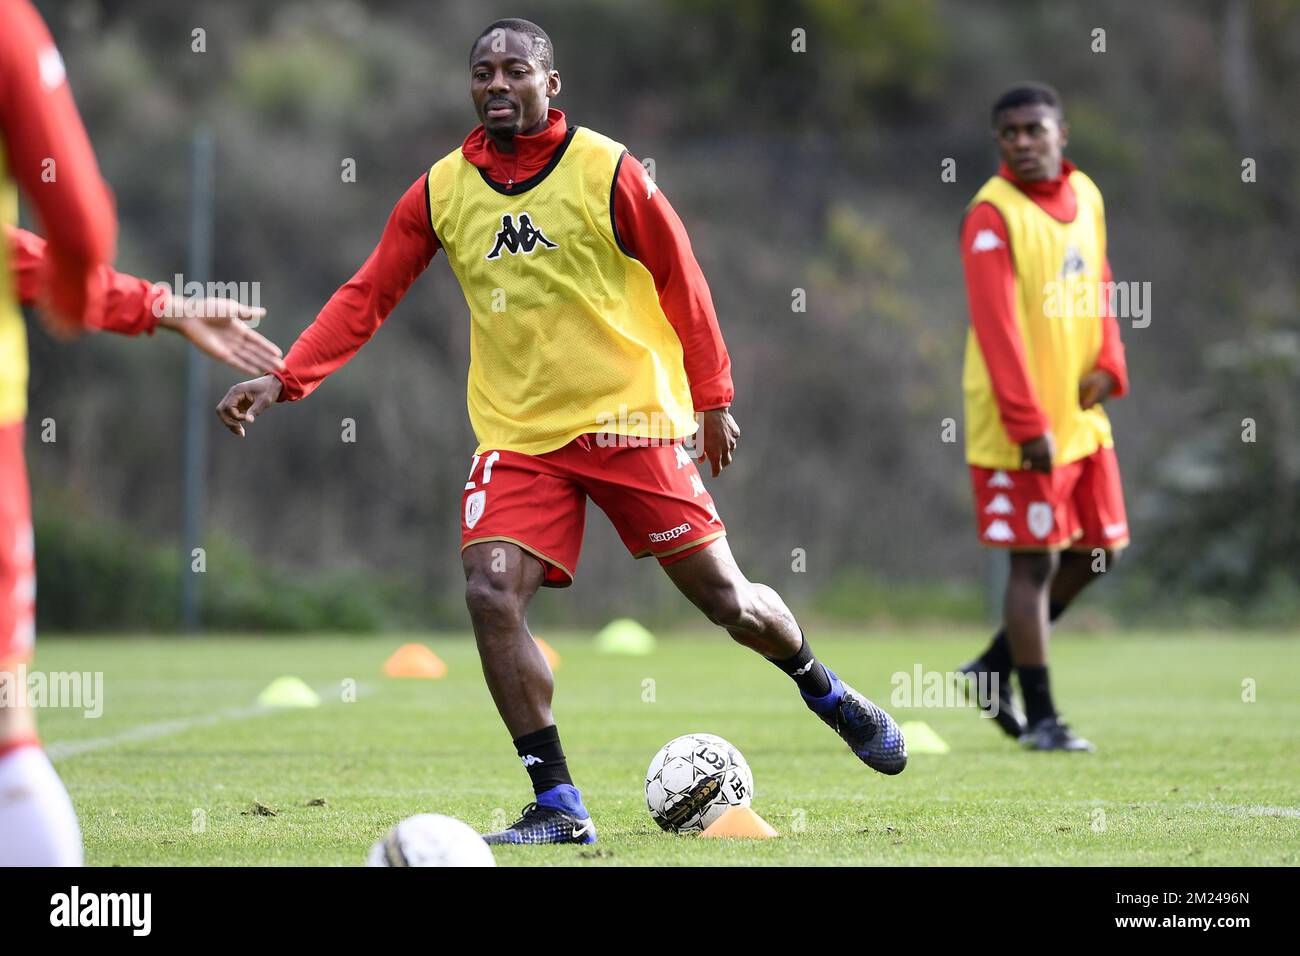 Standard's Eyong Enoh pictured during the first day of the winter training camp of Belgian first division soccer team Standard de Liege, in Marbella, Spain, Sunday 08 January 2017. BELGA PHOTO YORICK JANSENS Stock Photo